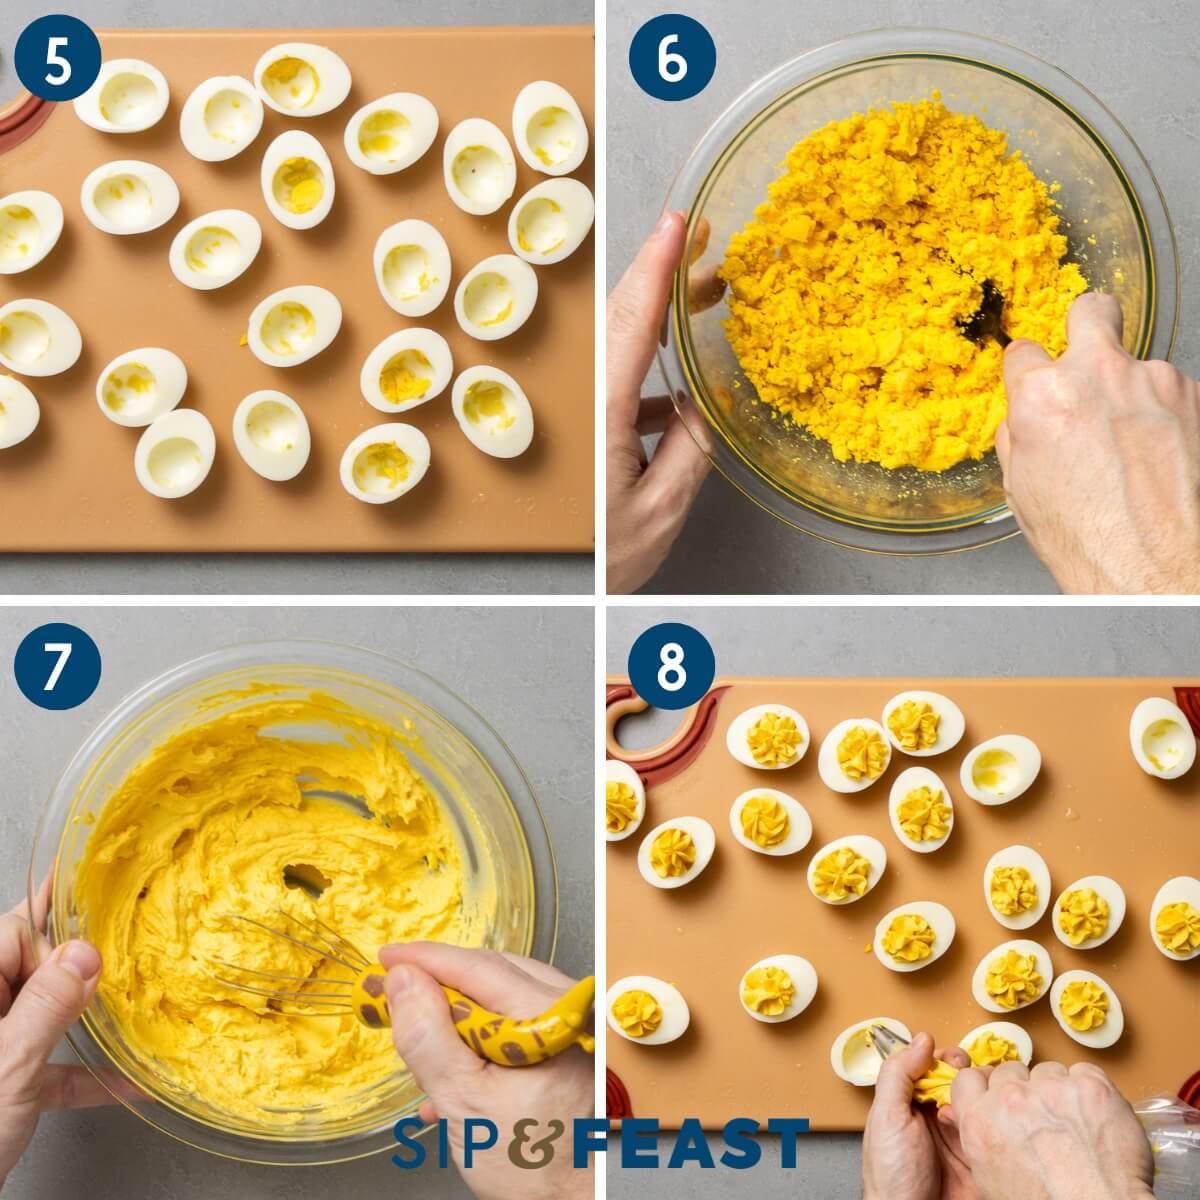 Recipe collage group two showing removing yolks from hard boiled eggs, mixing yolks in bowl, and piping yolk mixture into egg white halves.